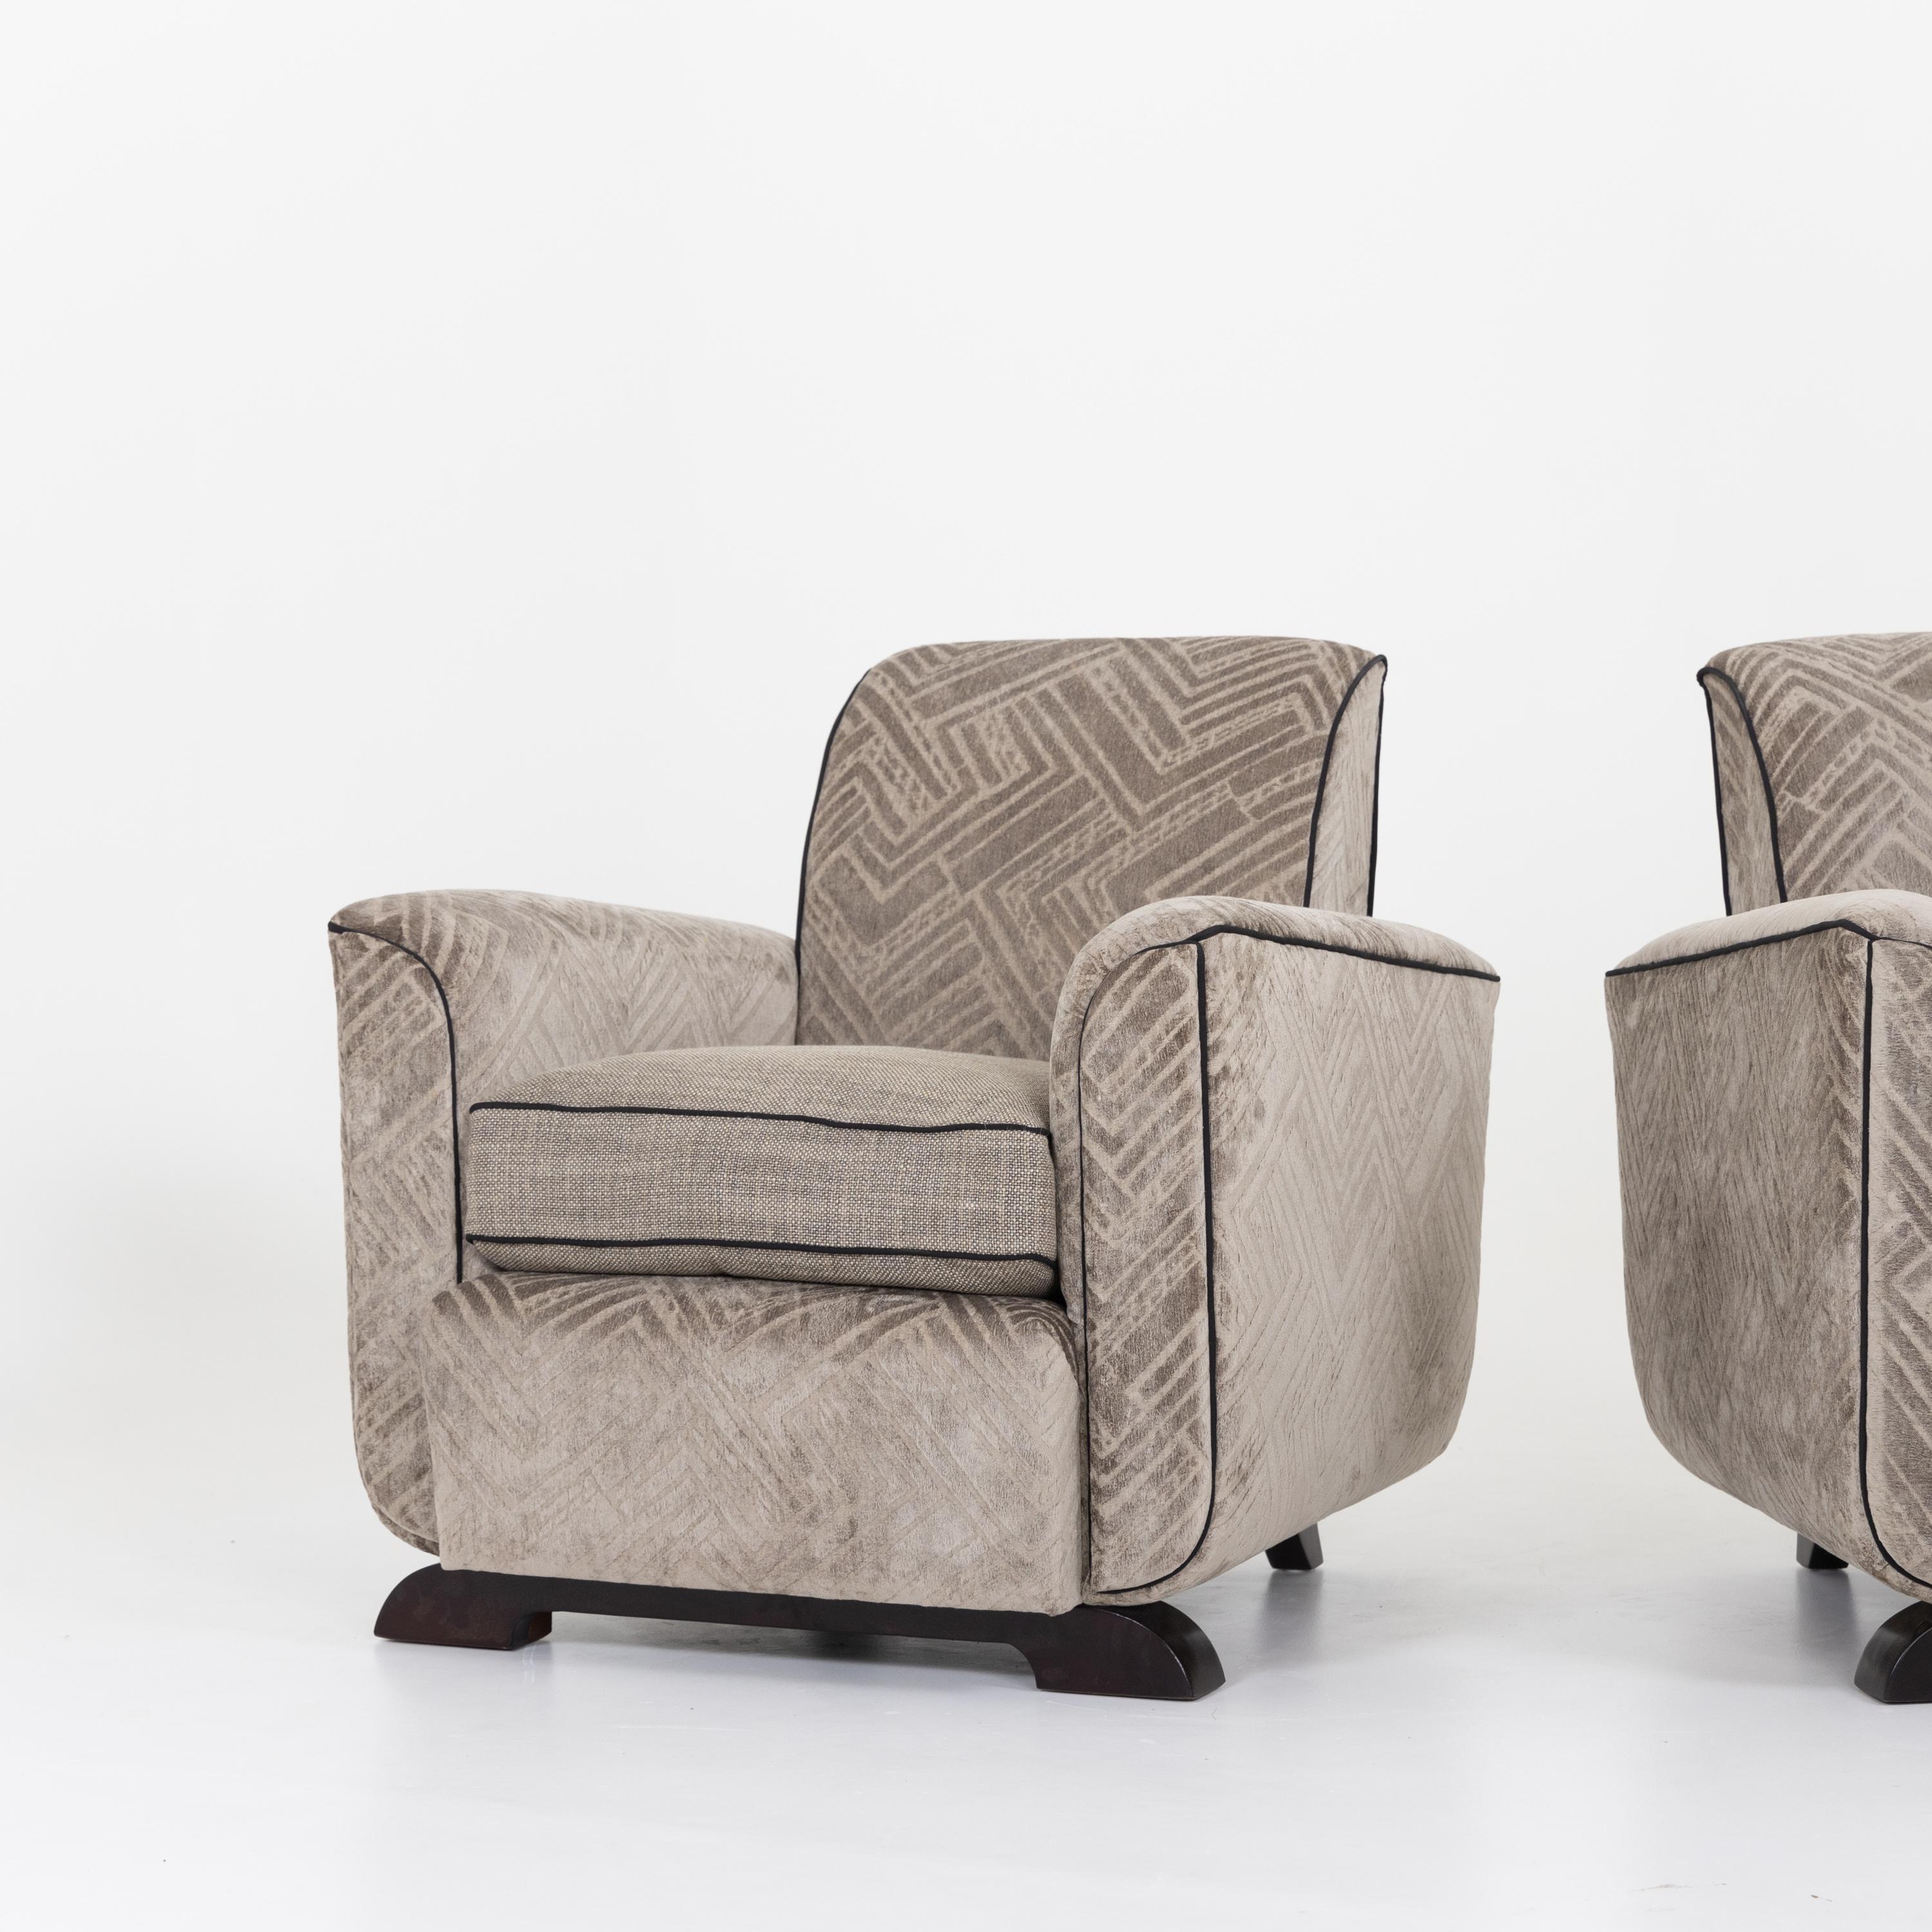 Pair of Art Deco Lounge Chairs, France, 1920s For Sale 2